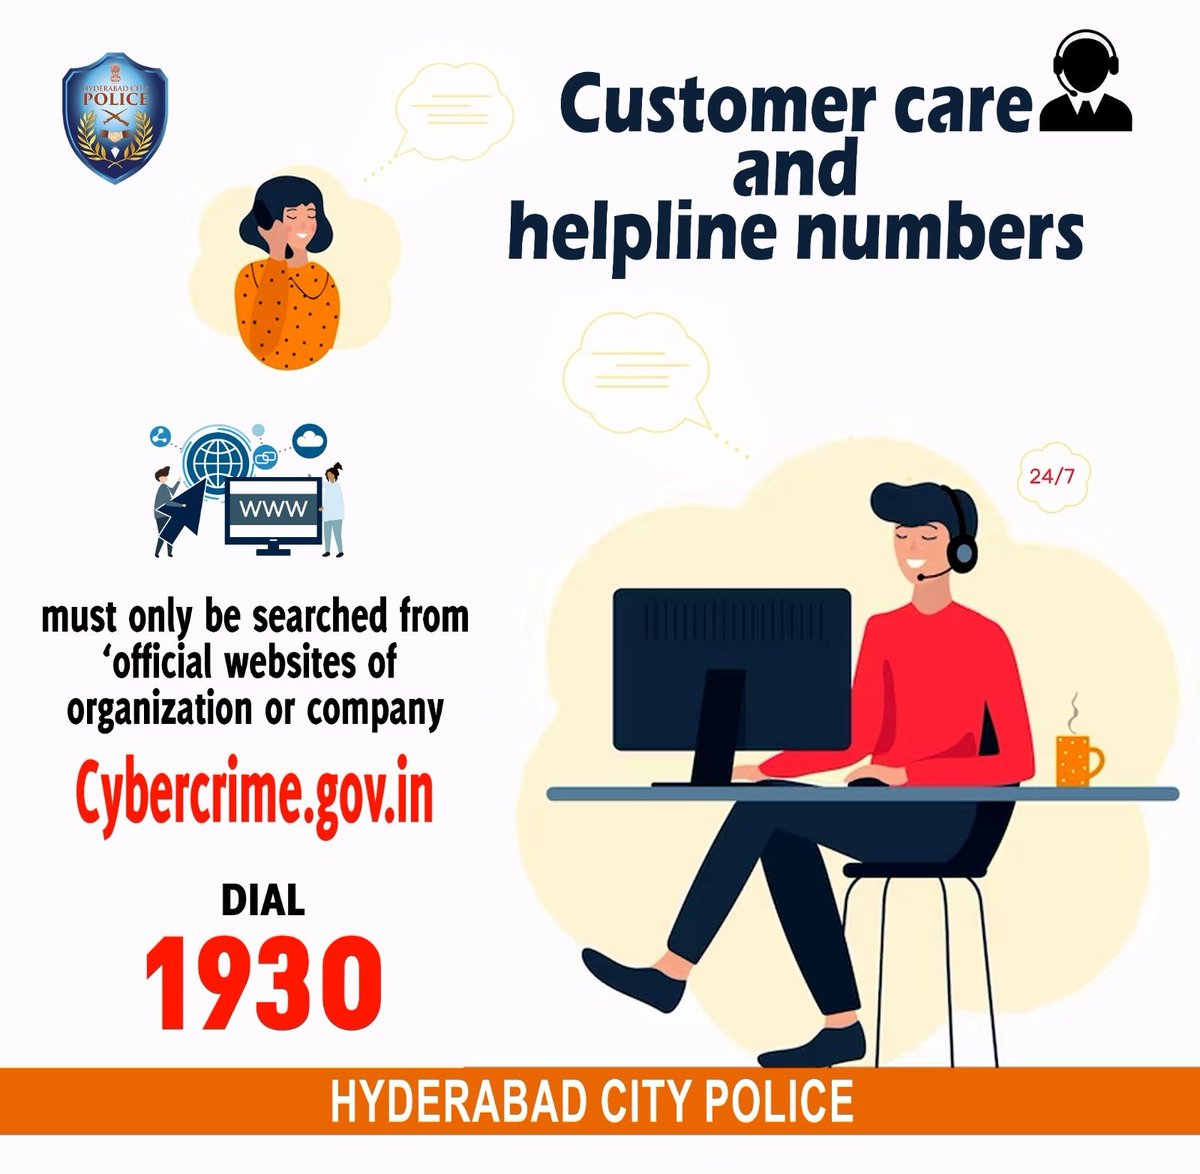 It's important to be cautious when searching for customer care numbers #online, as some may be #fraudulent or lead to #scams. Always try to verify the #legitimacy of the number through official sources before contacting them. #Cybercrime #Bevigilant